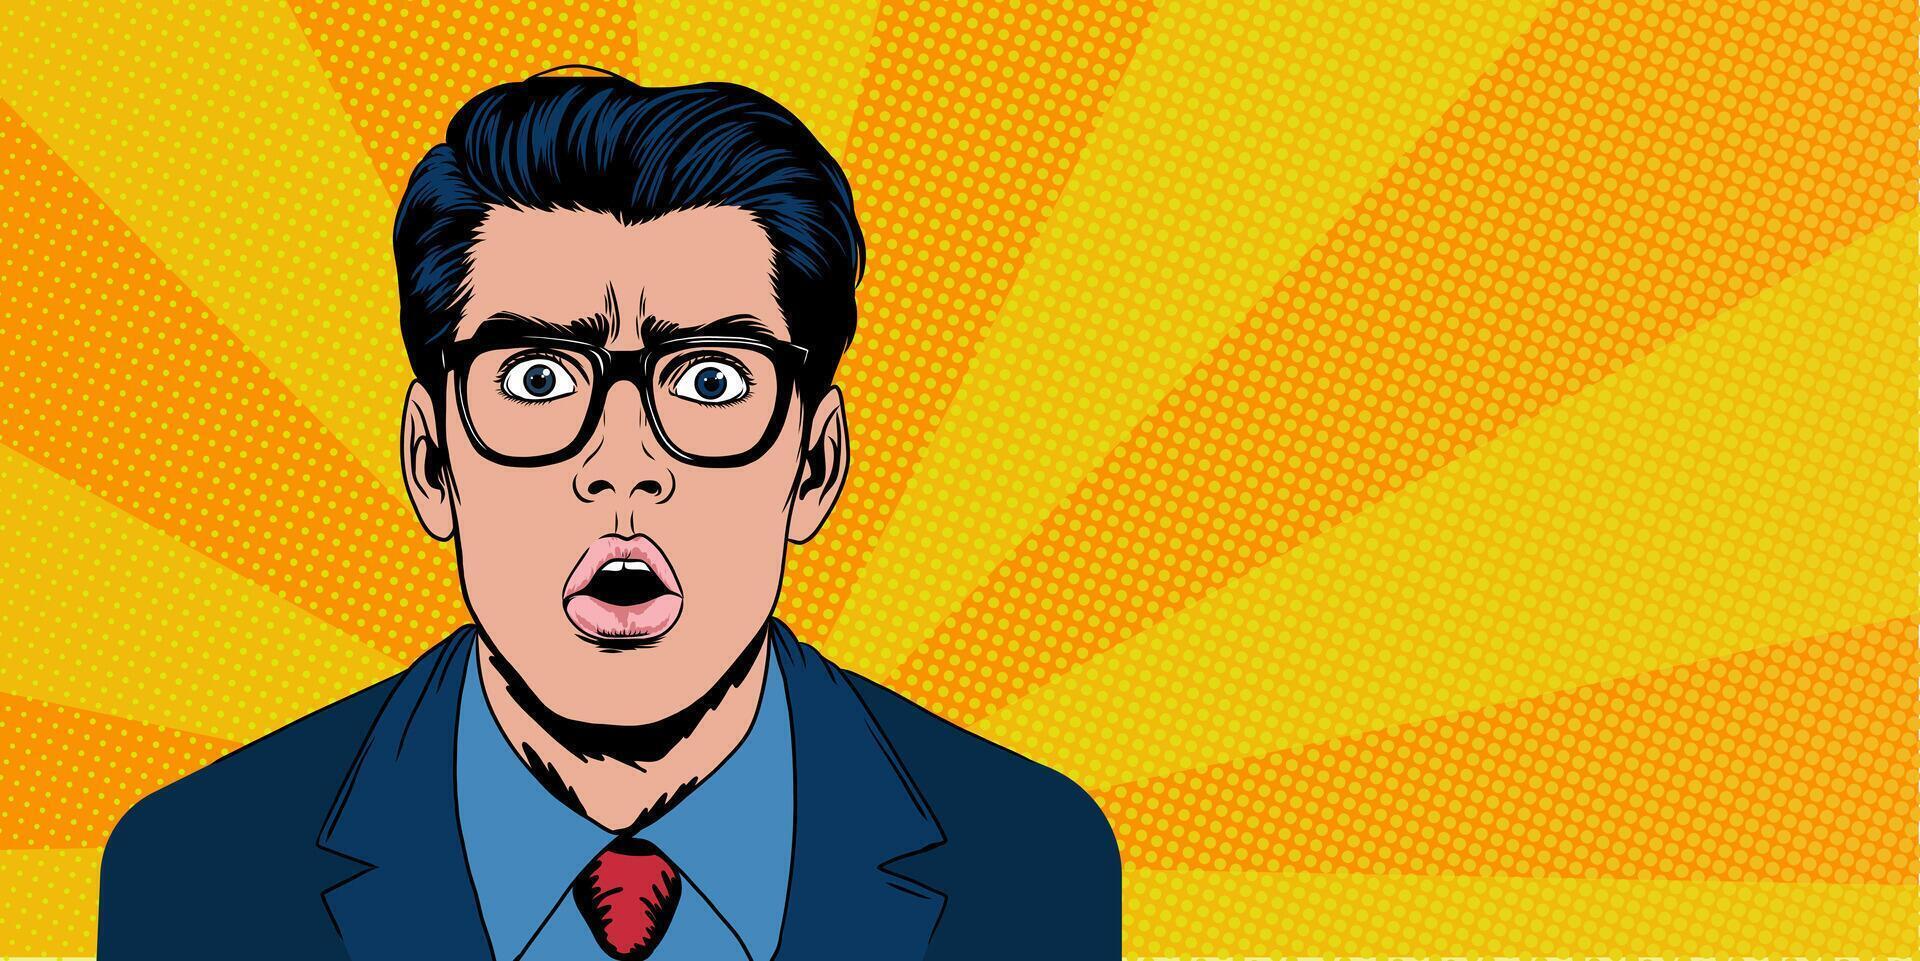 Shocked young man with wide open eyes and mouth. illustration in retro pop-art comic style. banner design template with copy space for text for ads, social media, web. vector